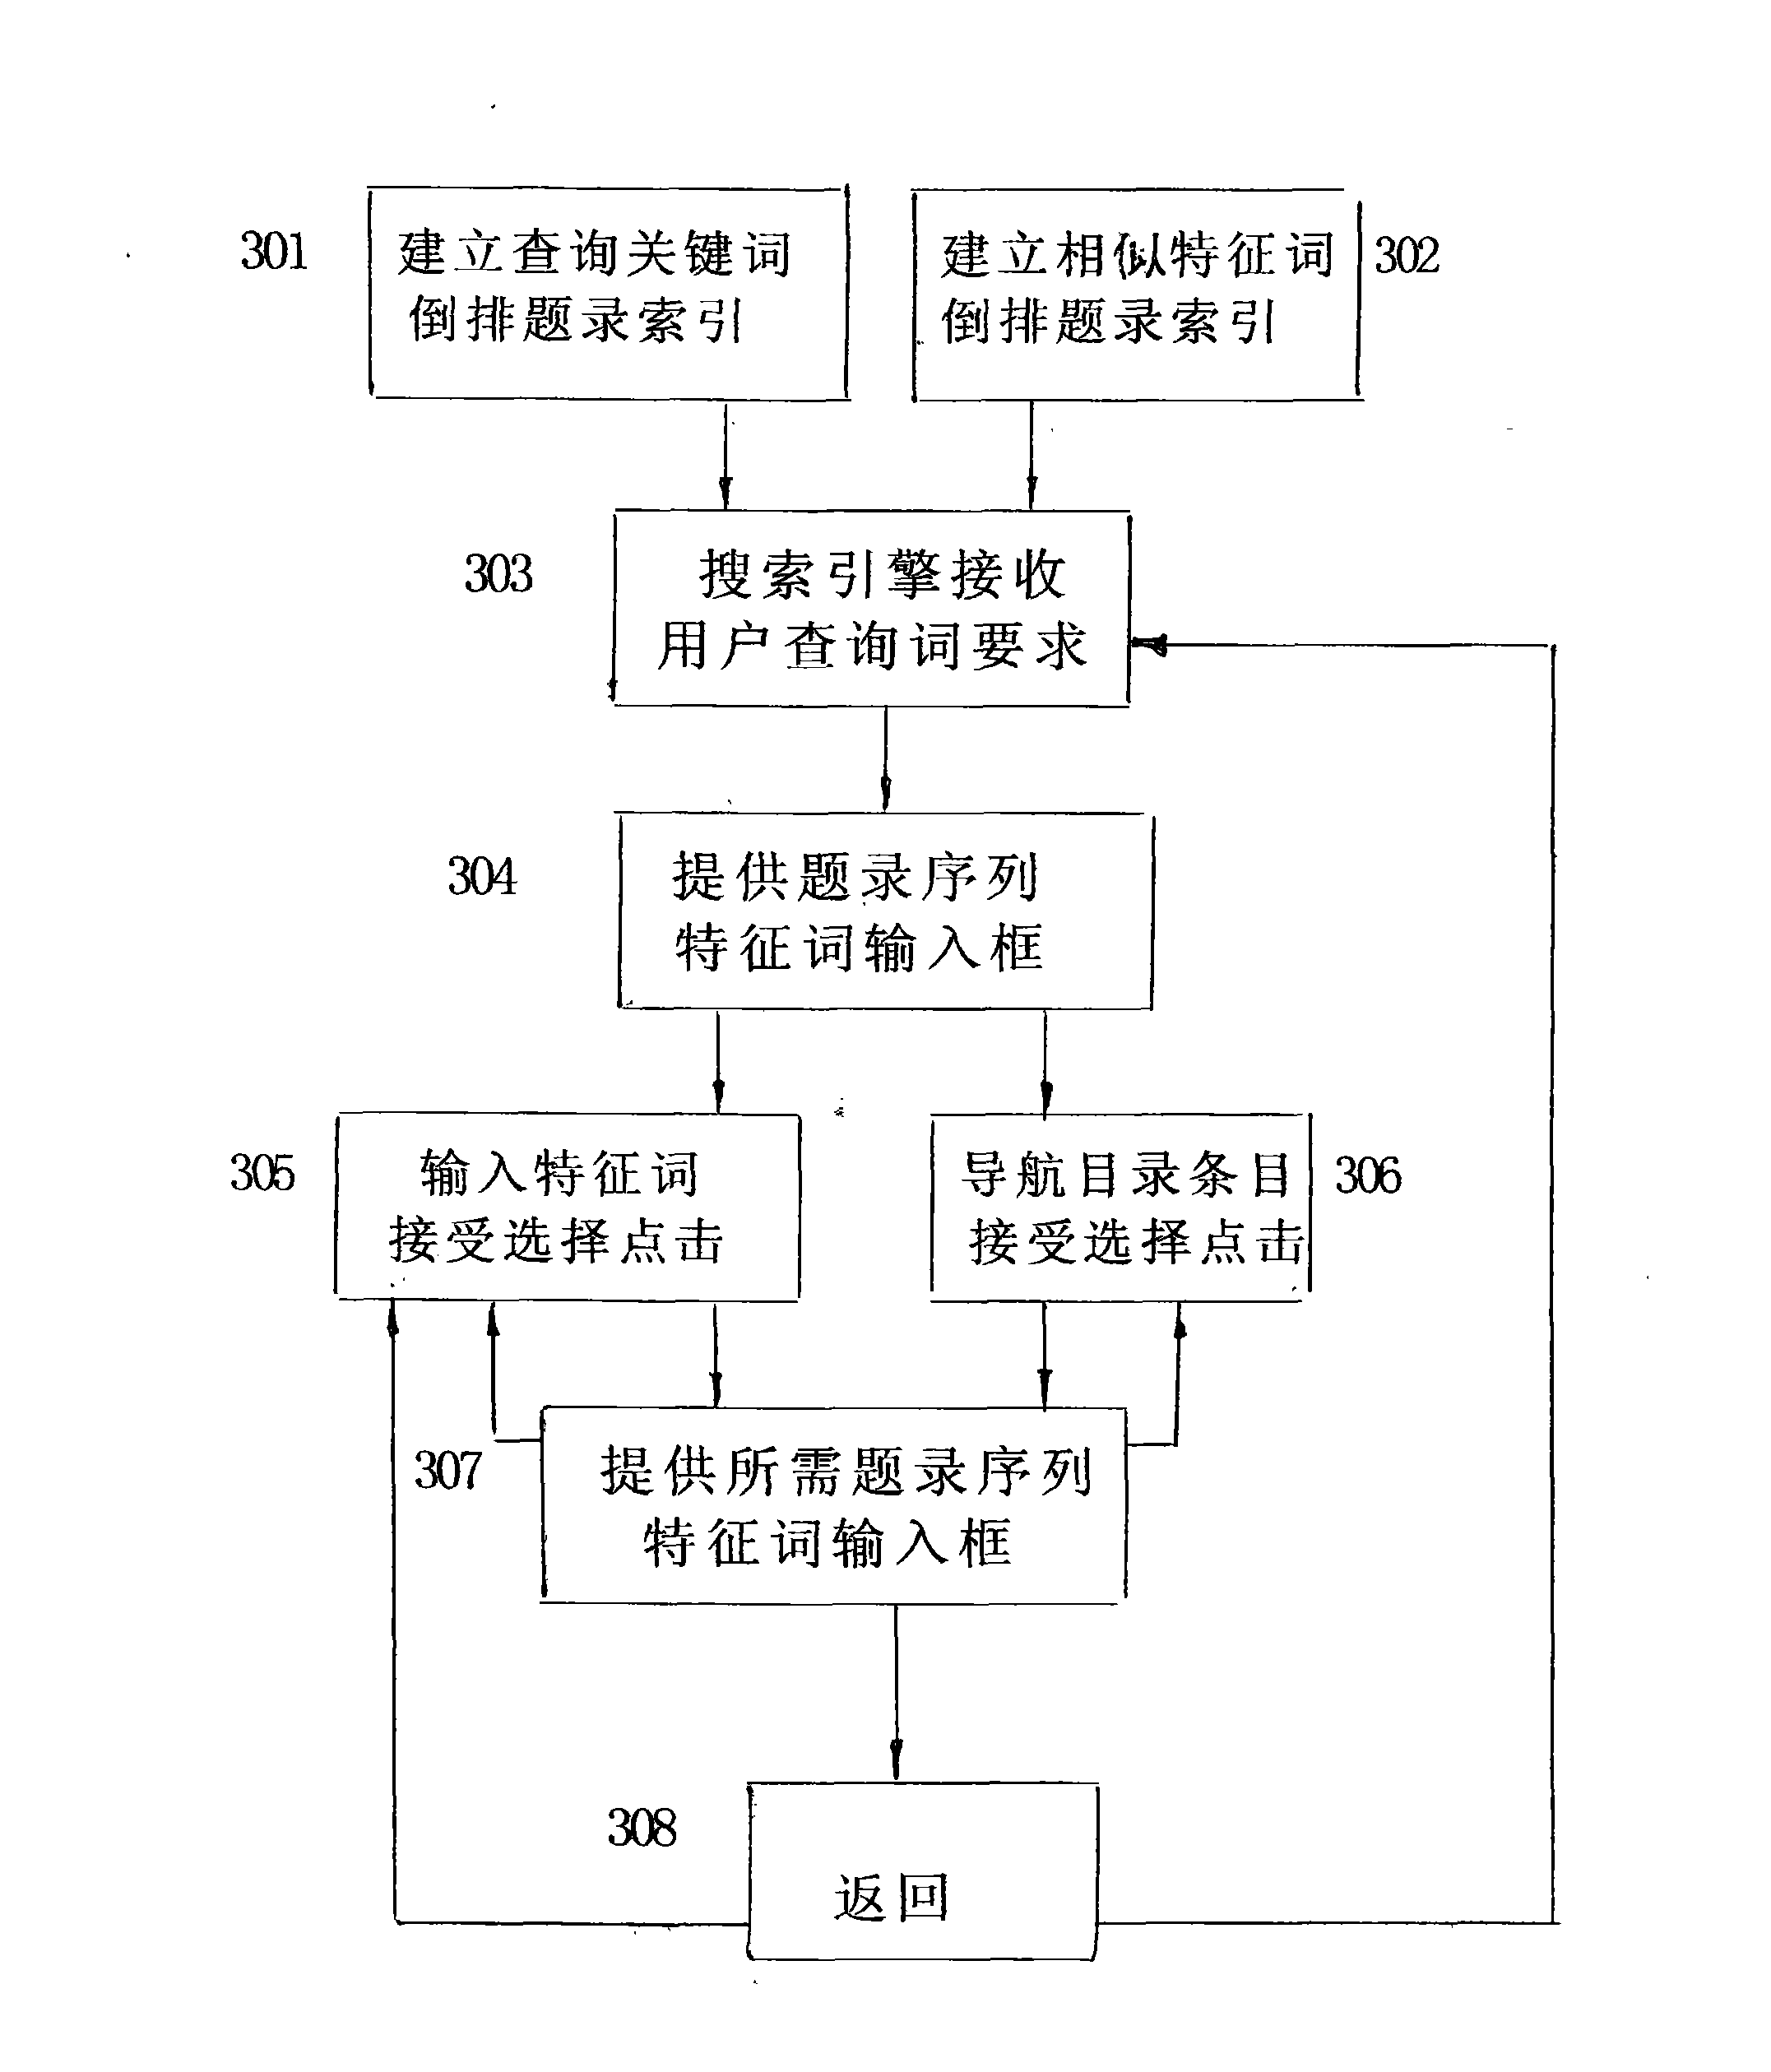 Processing method for inputting additional search requirements into search engines